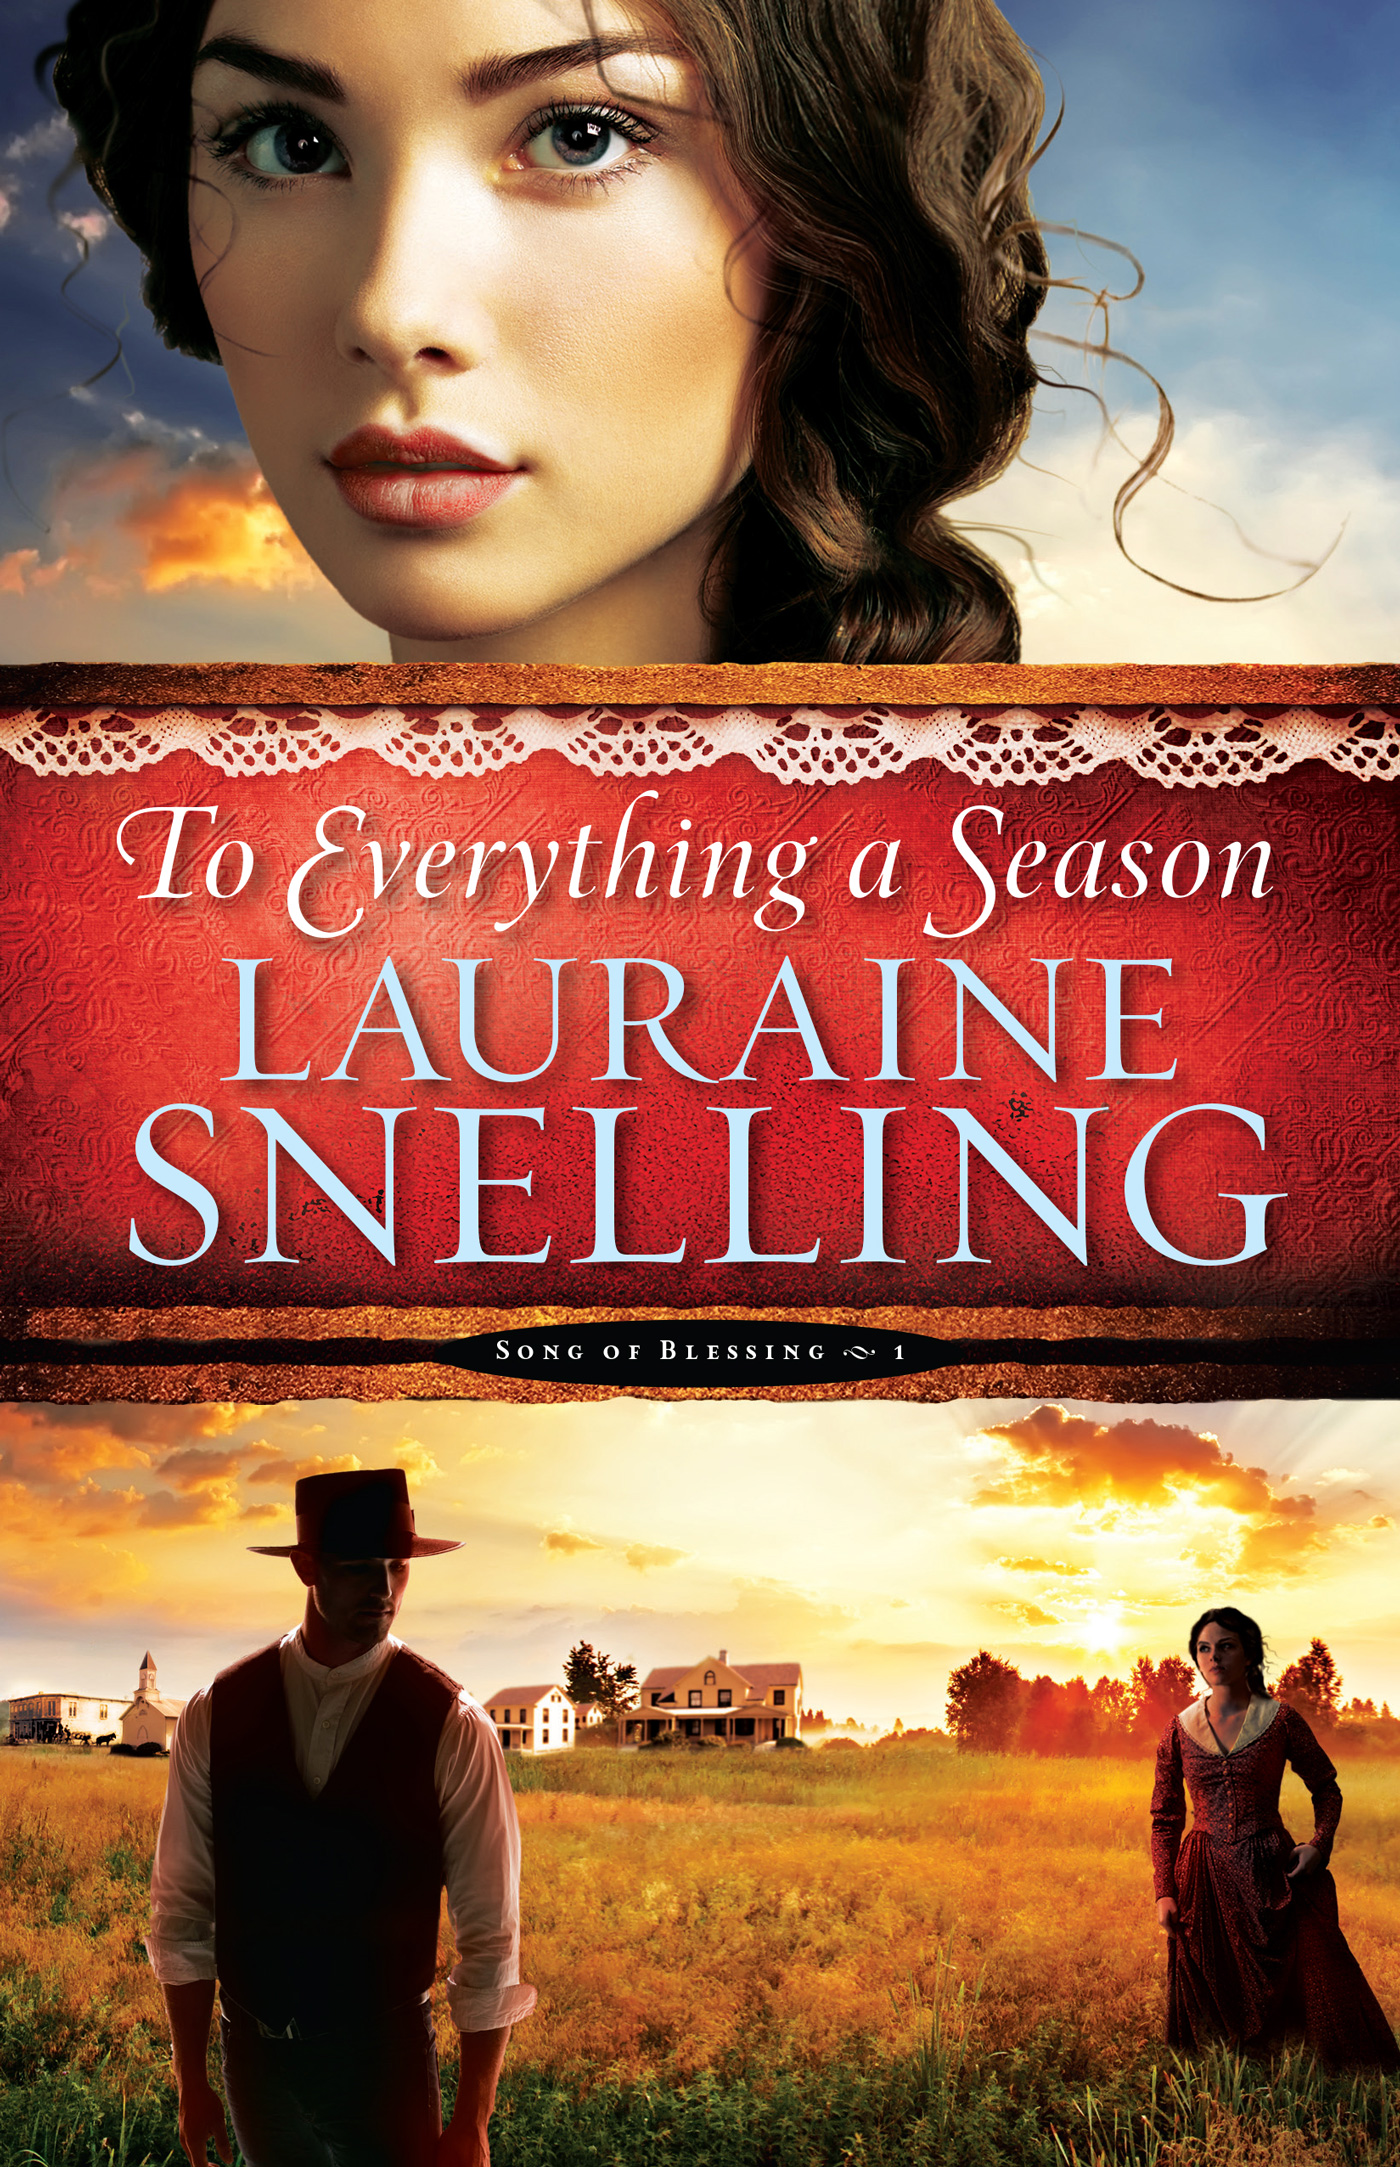 To Everything a Season (2014) by Lauraine Snelling